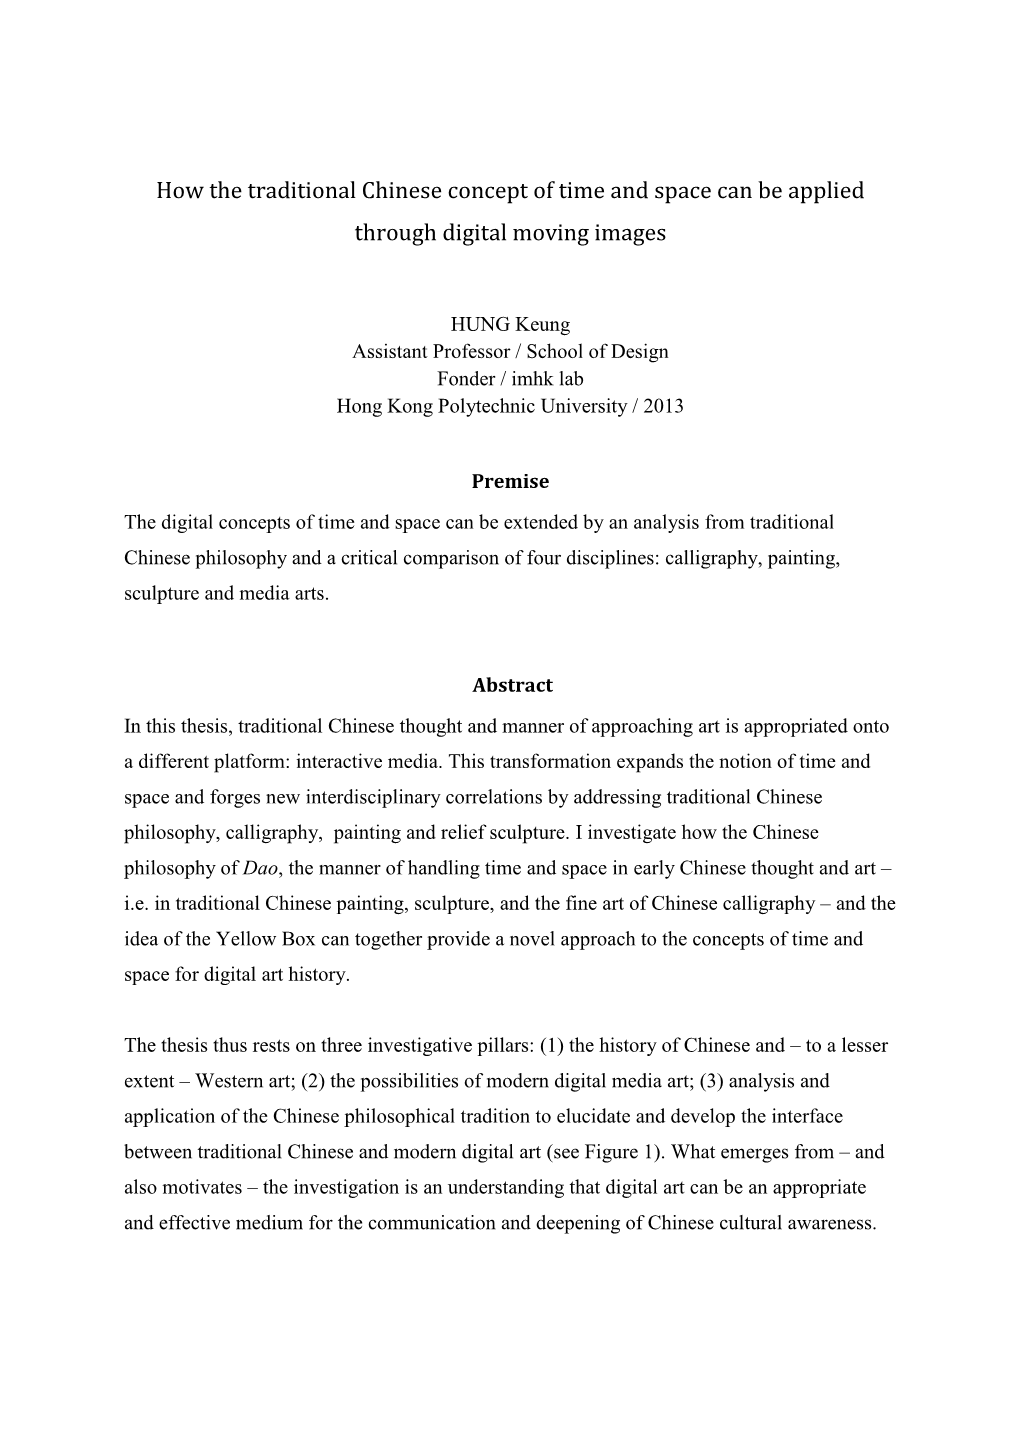 How the Traditional Chinese Concept of Time and Space Can Be Applied Through Digital Moving Images